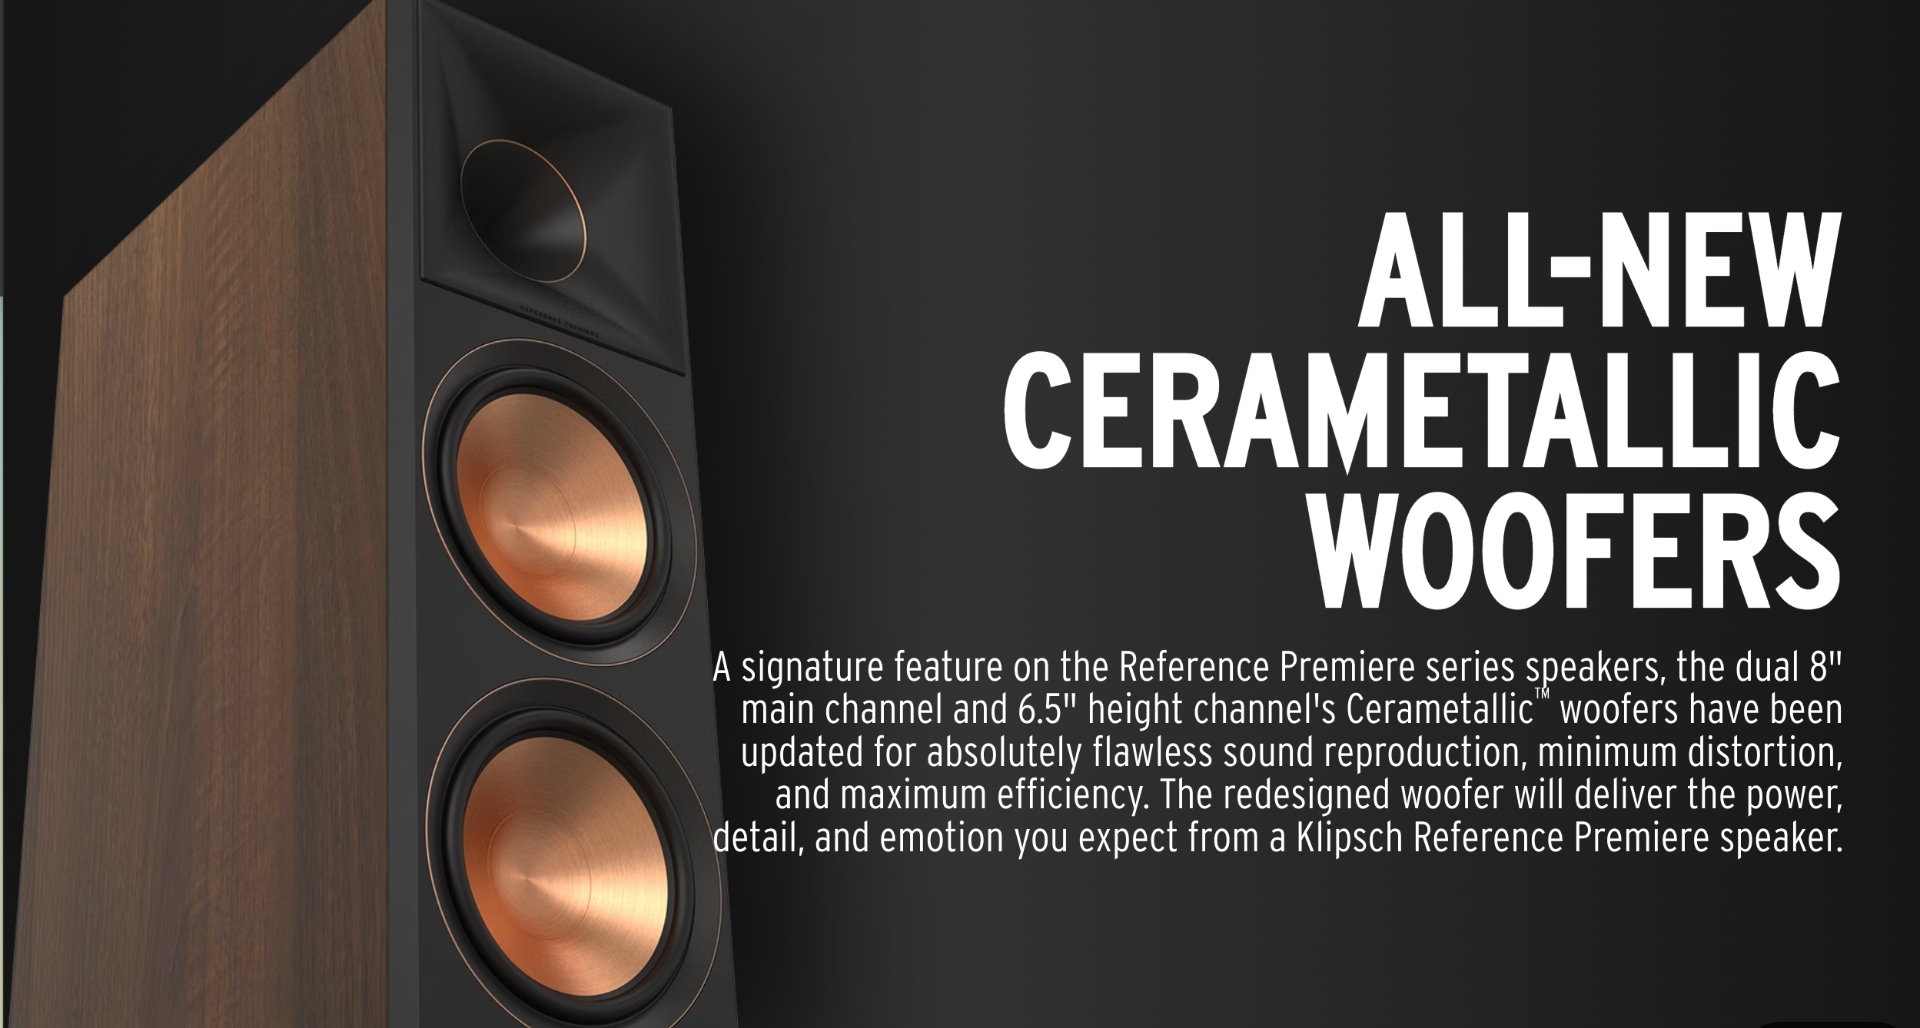 A signature feature on the Reference Premiere series speakers, the dual 8